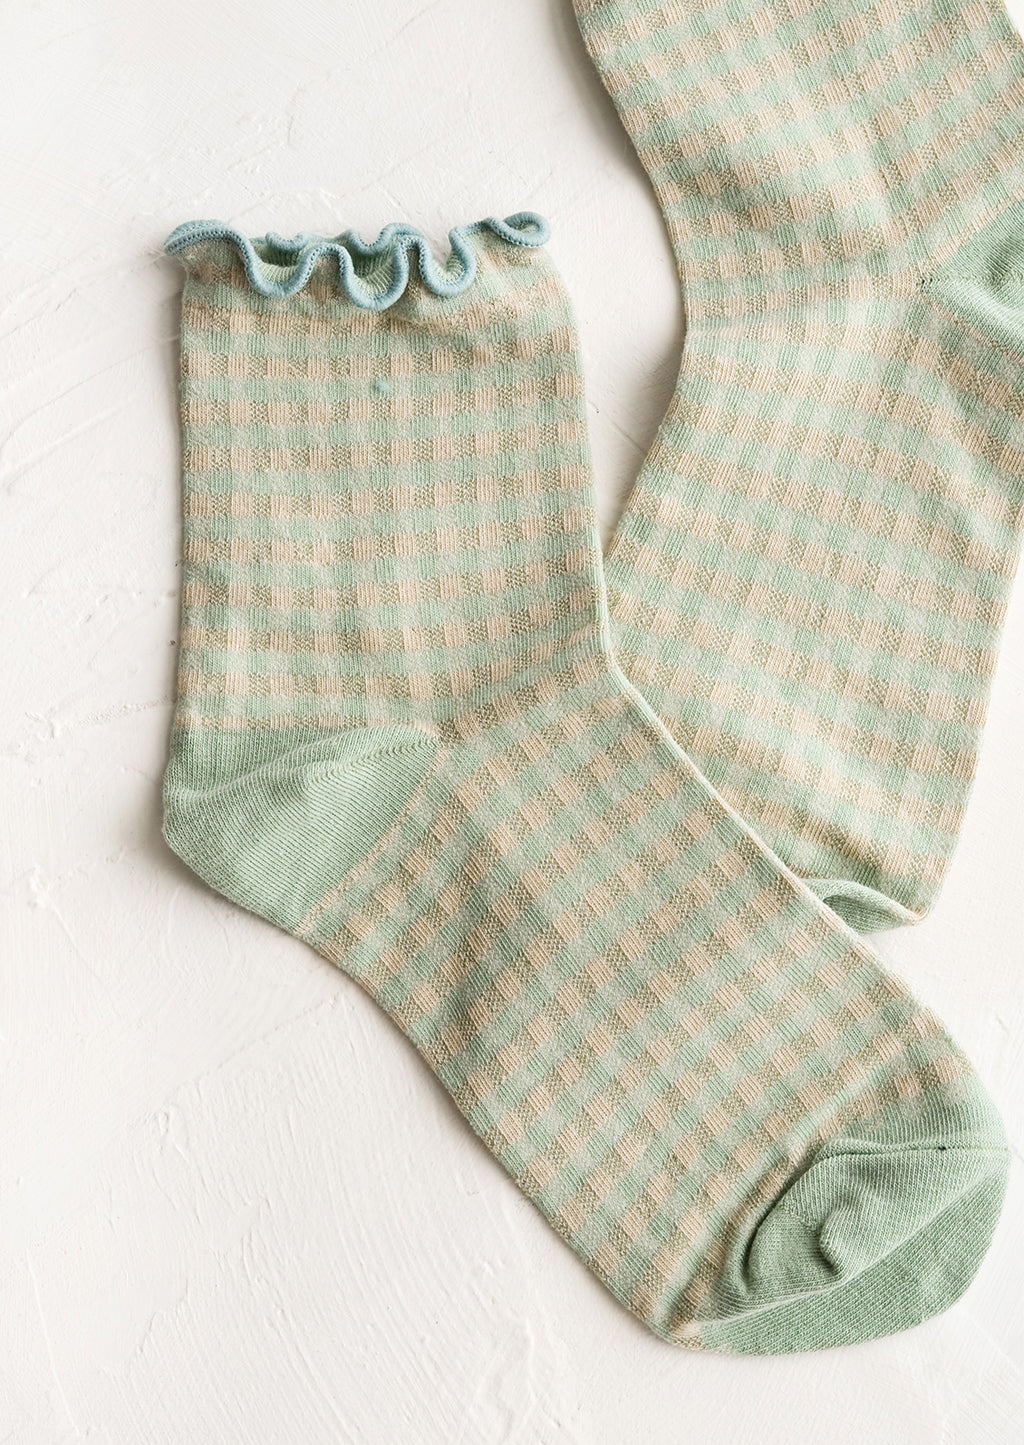 Mint Green: A pair of mint green gingham patterned socks with ankle ruffle.